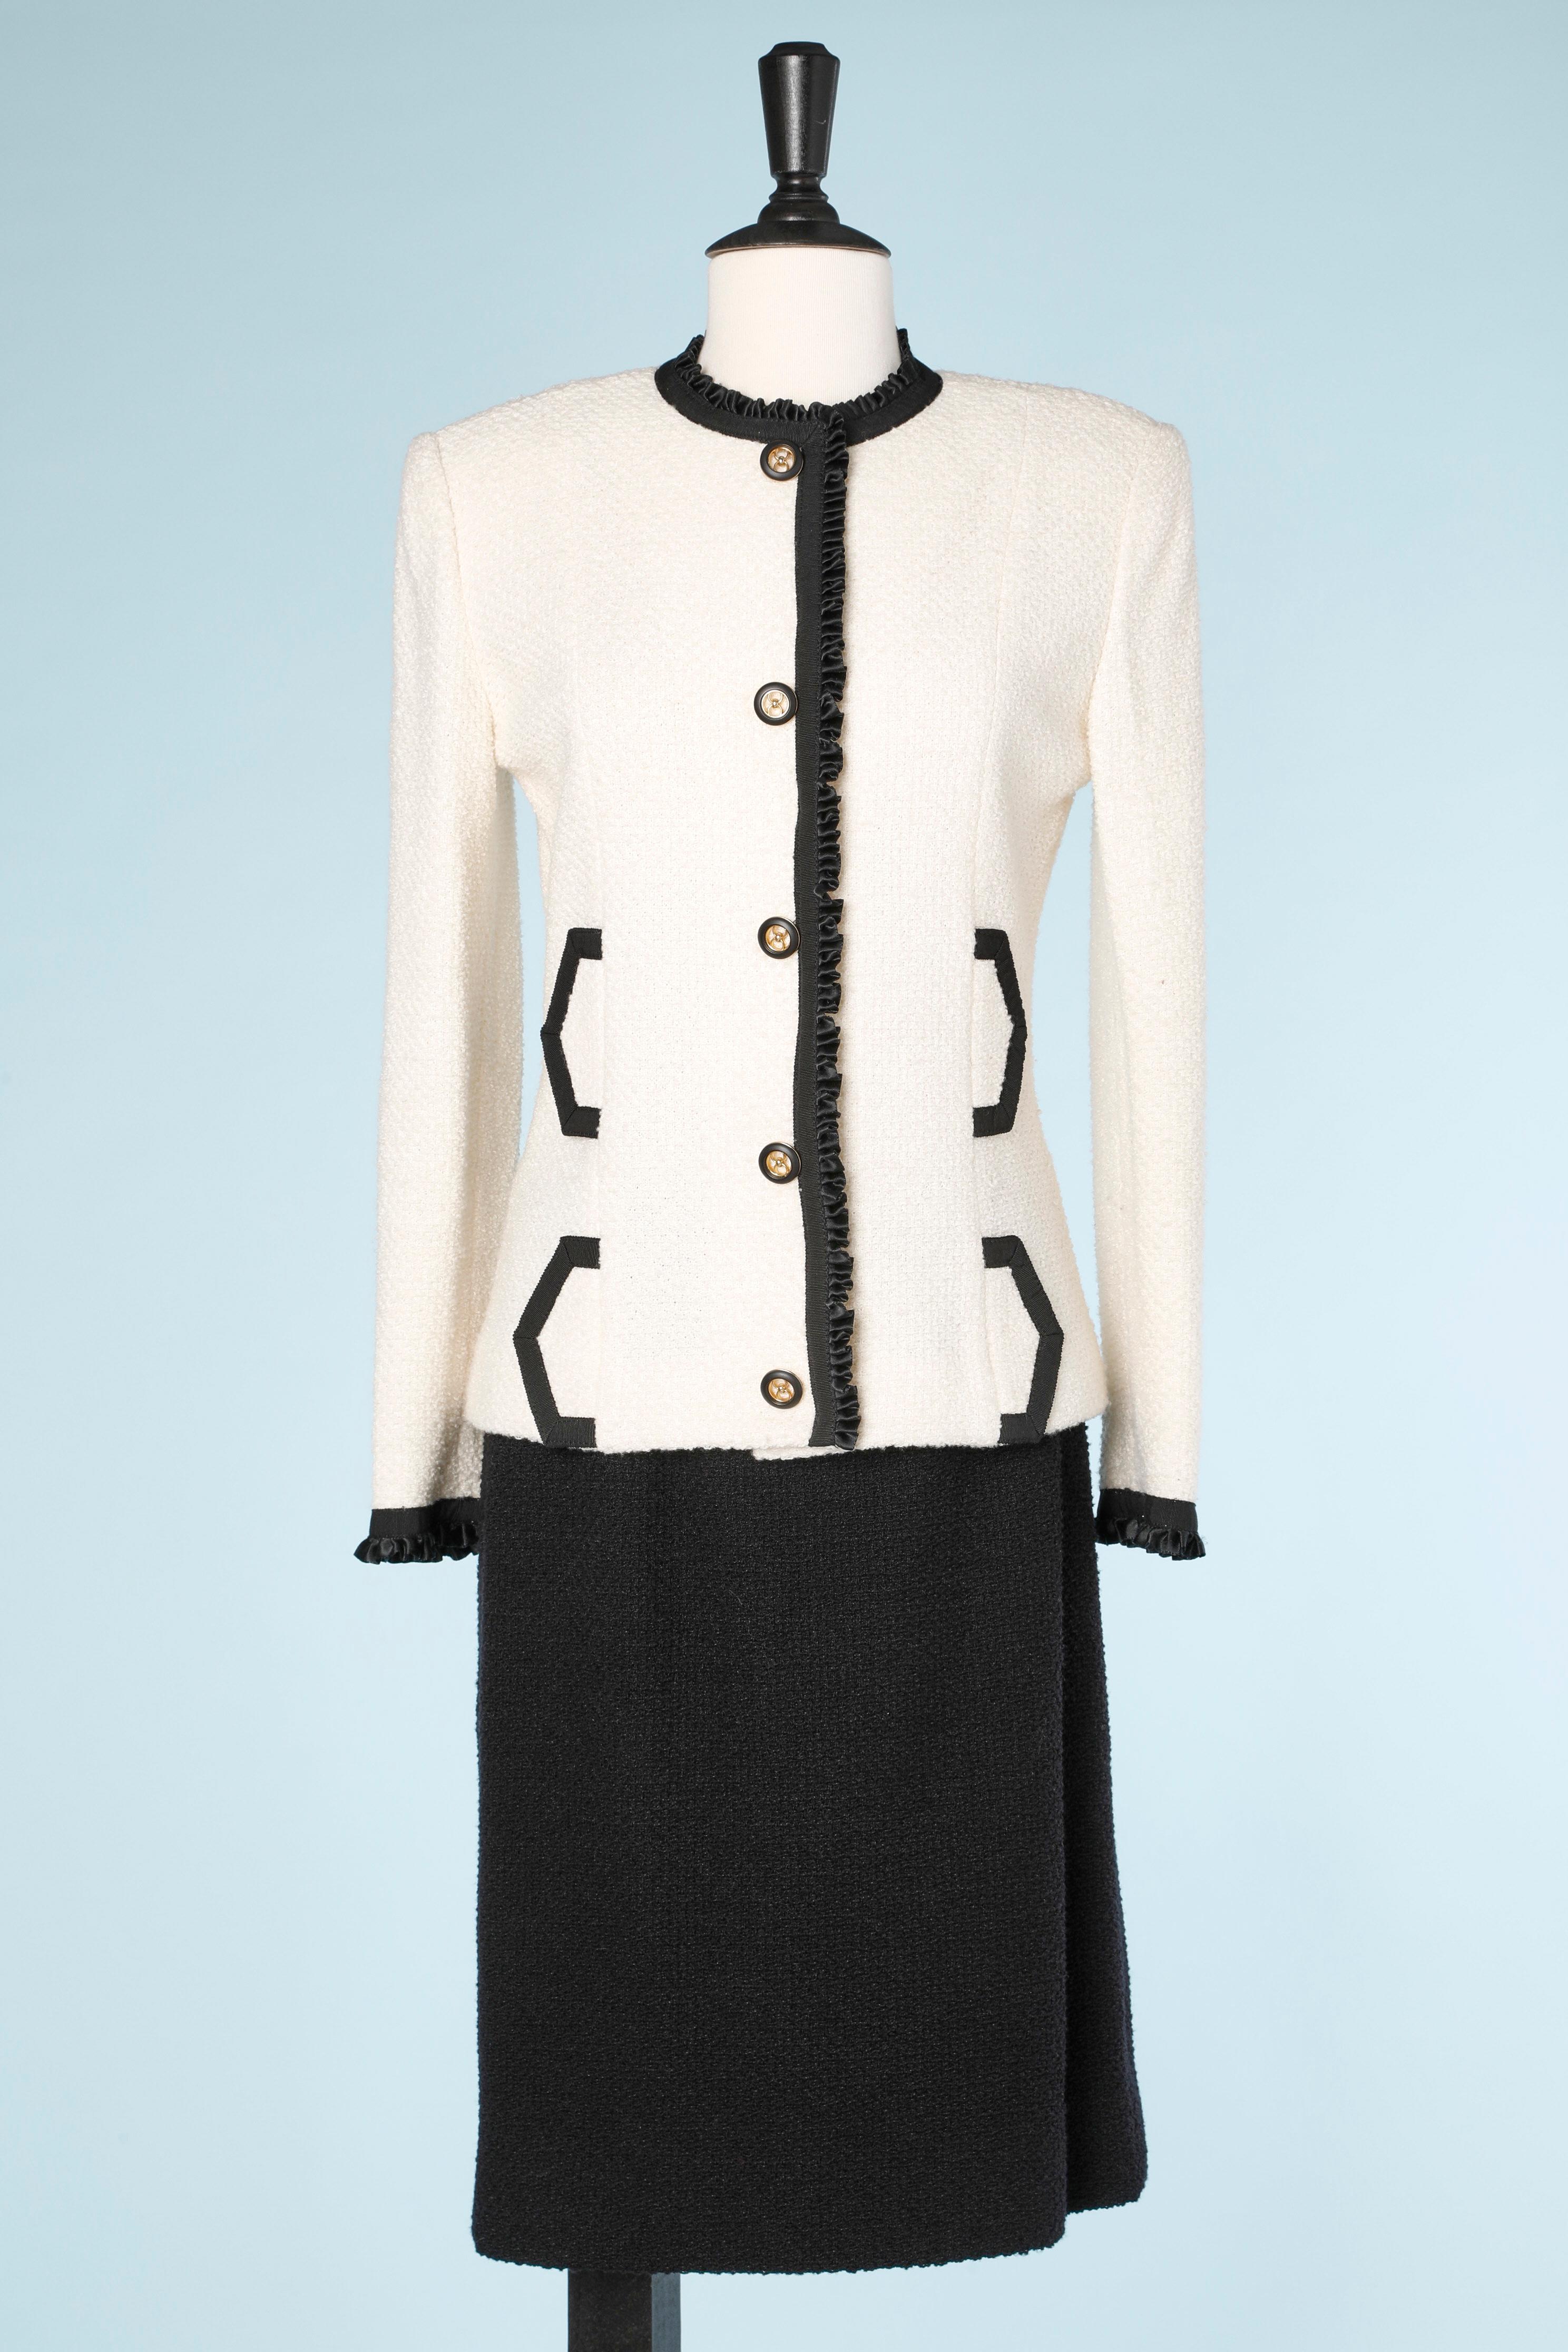 Black & White suit in wool with gold metal buttons
